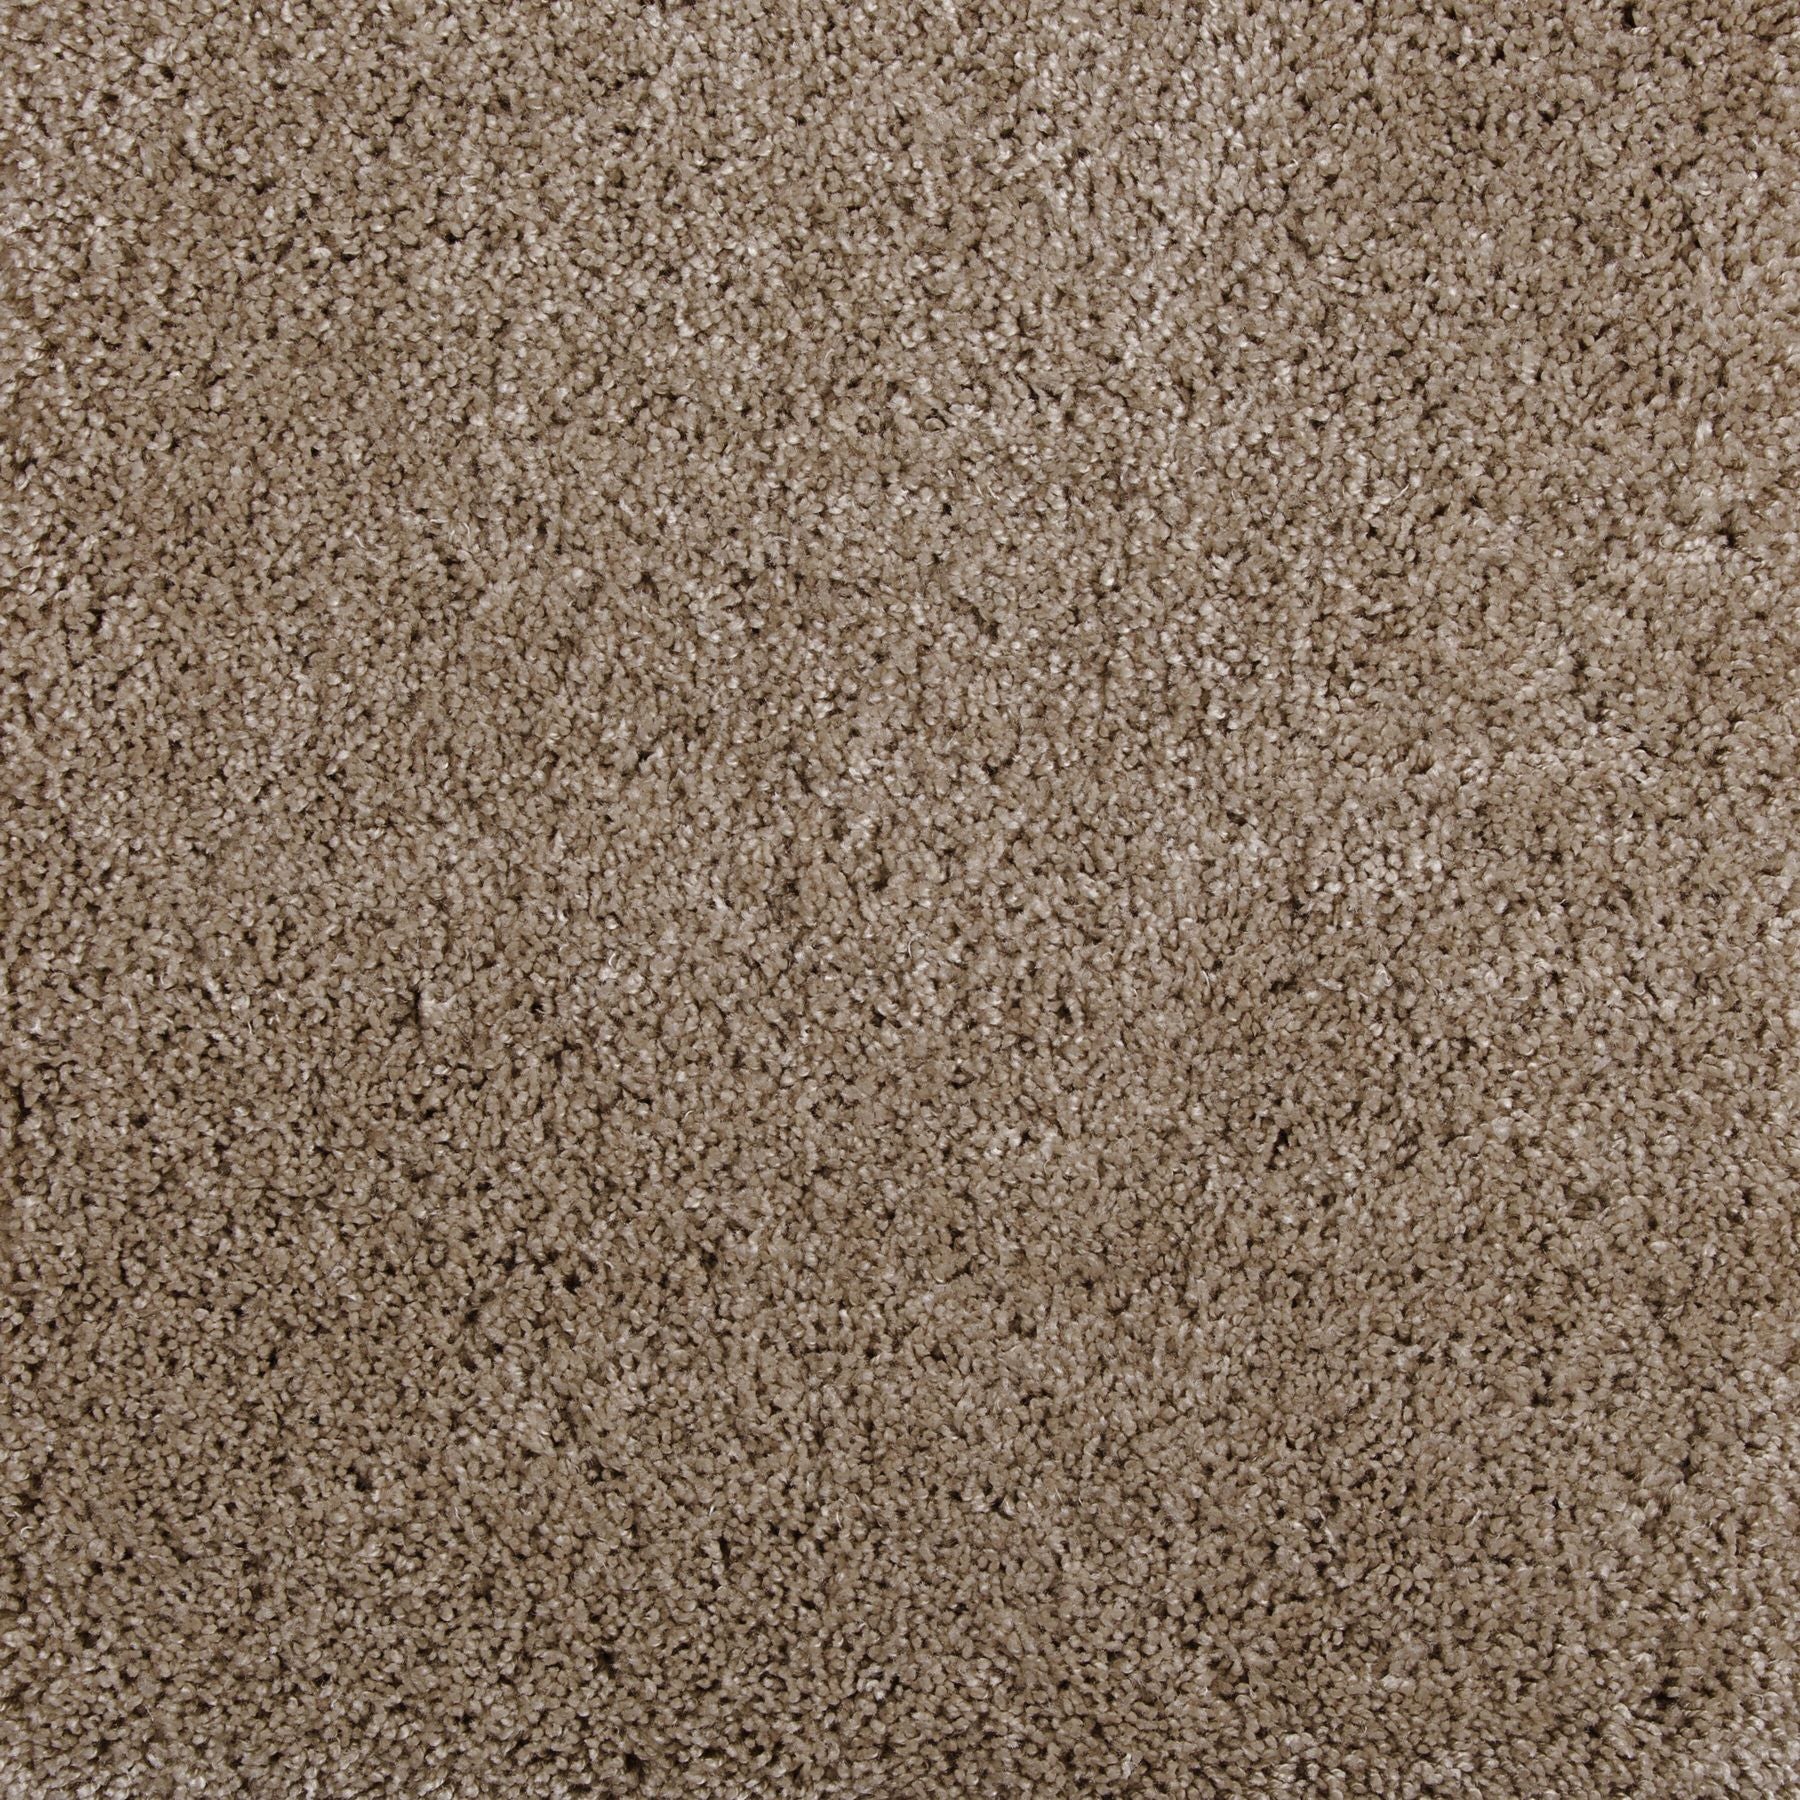 Synthetic broadloom carpet swatch in a cut pile texture in light brown.